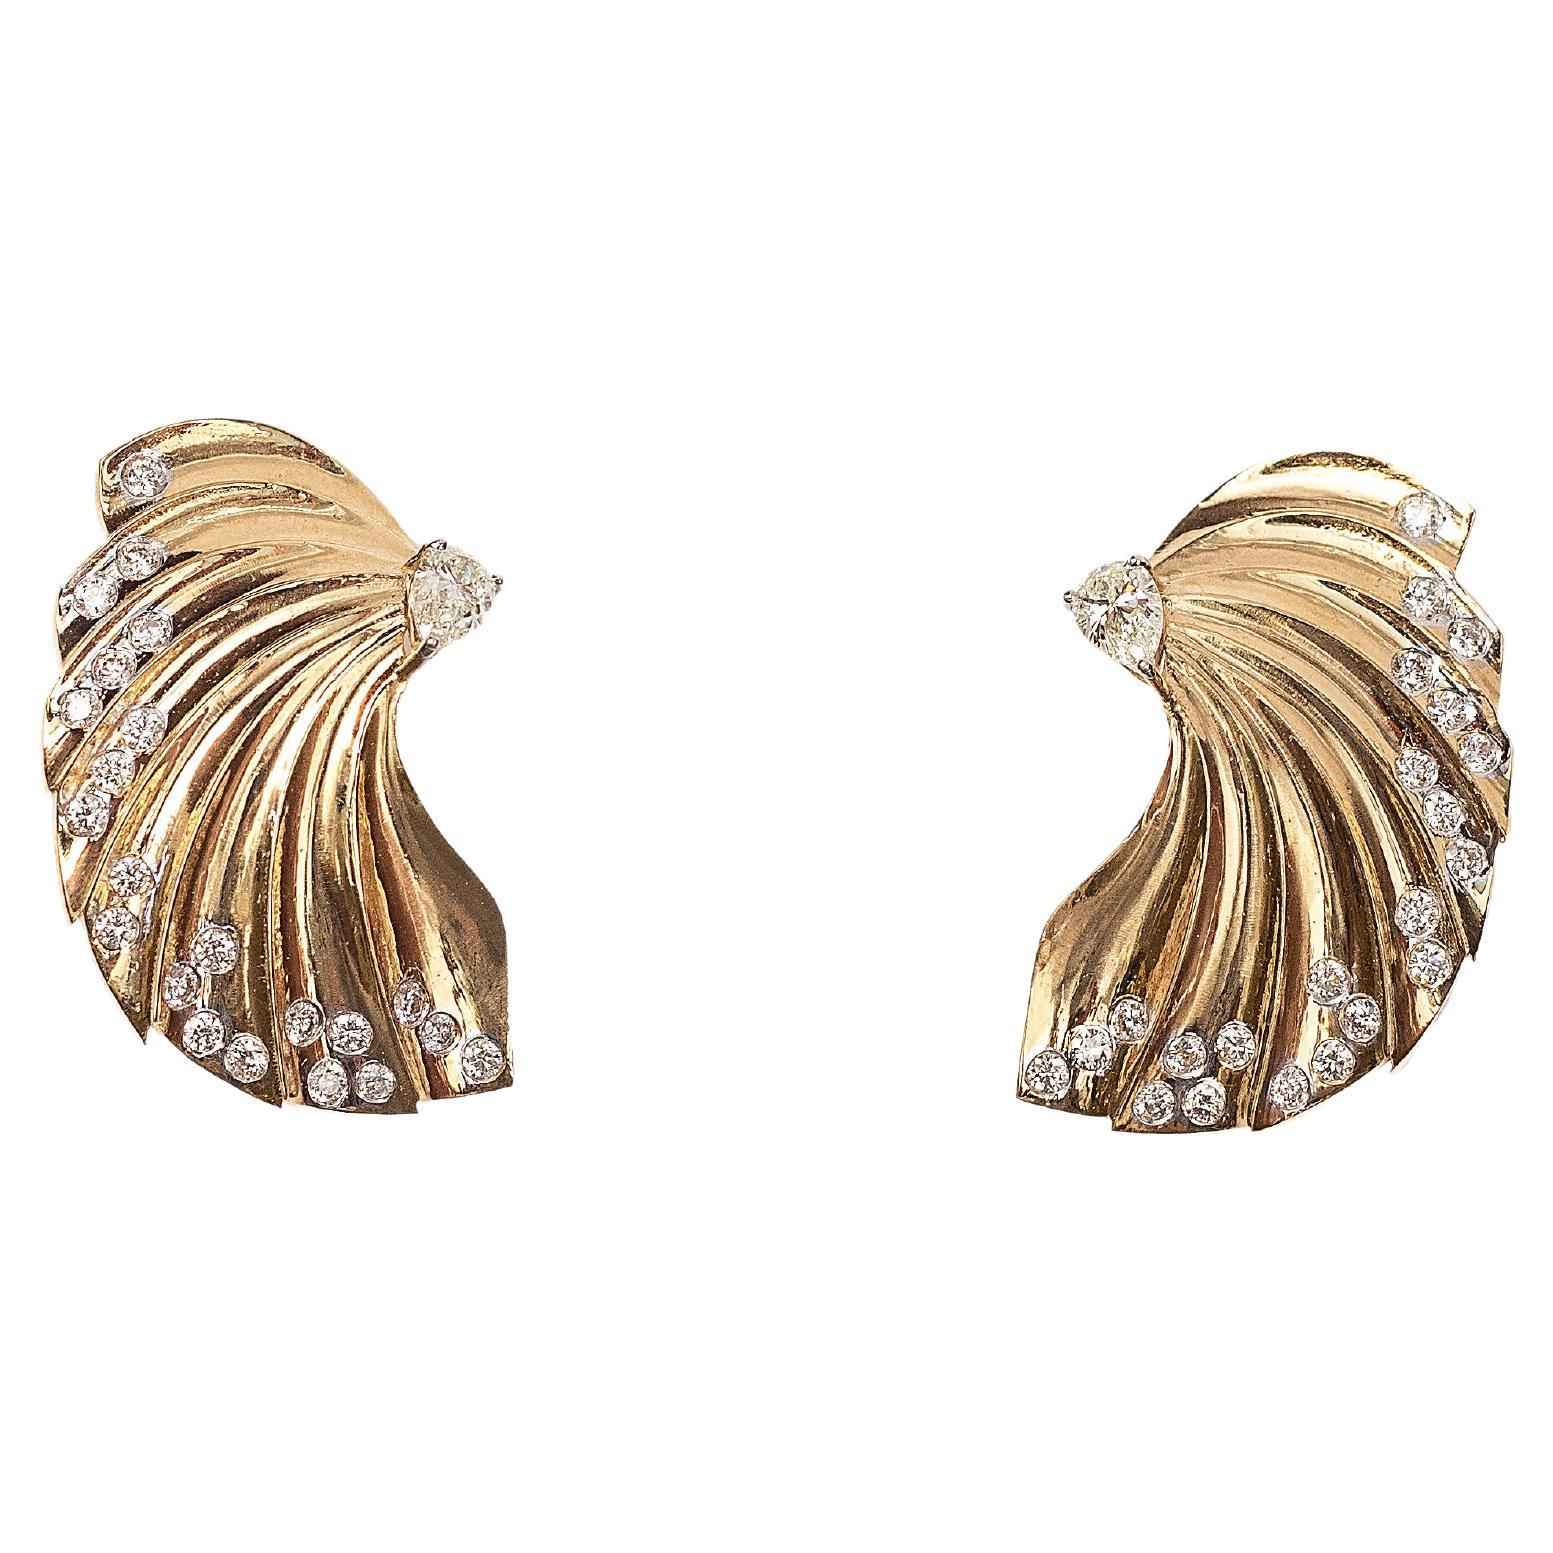 1.59 cts Studs Earrings in 18K Yellow Gold